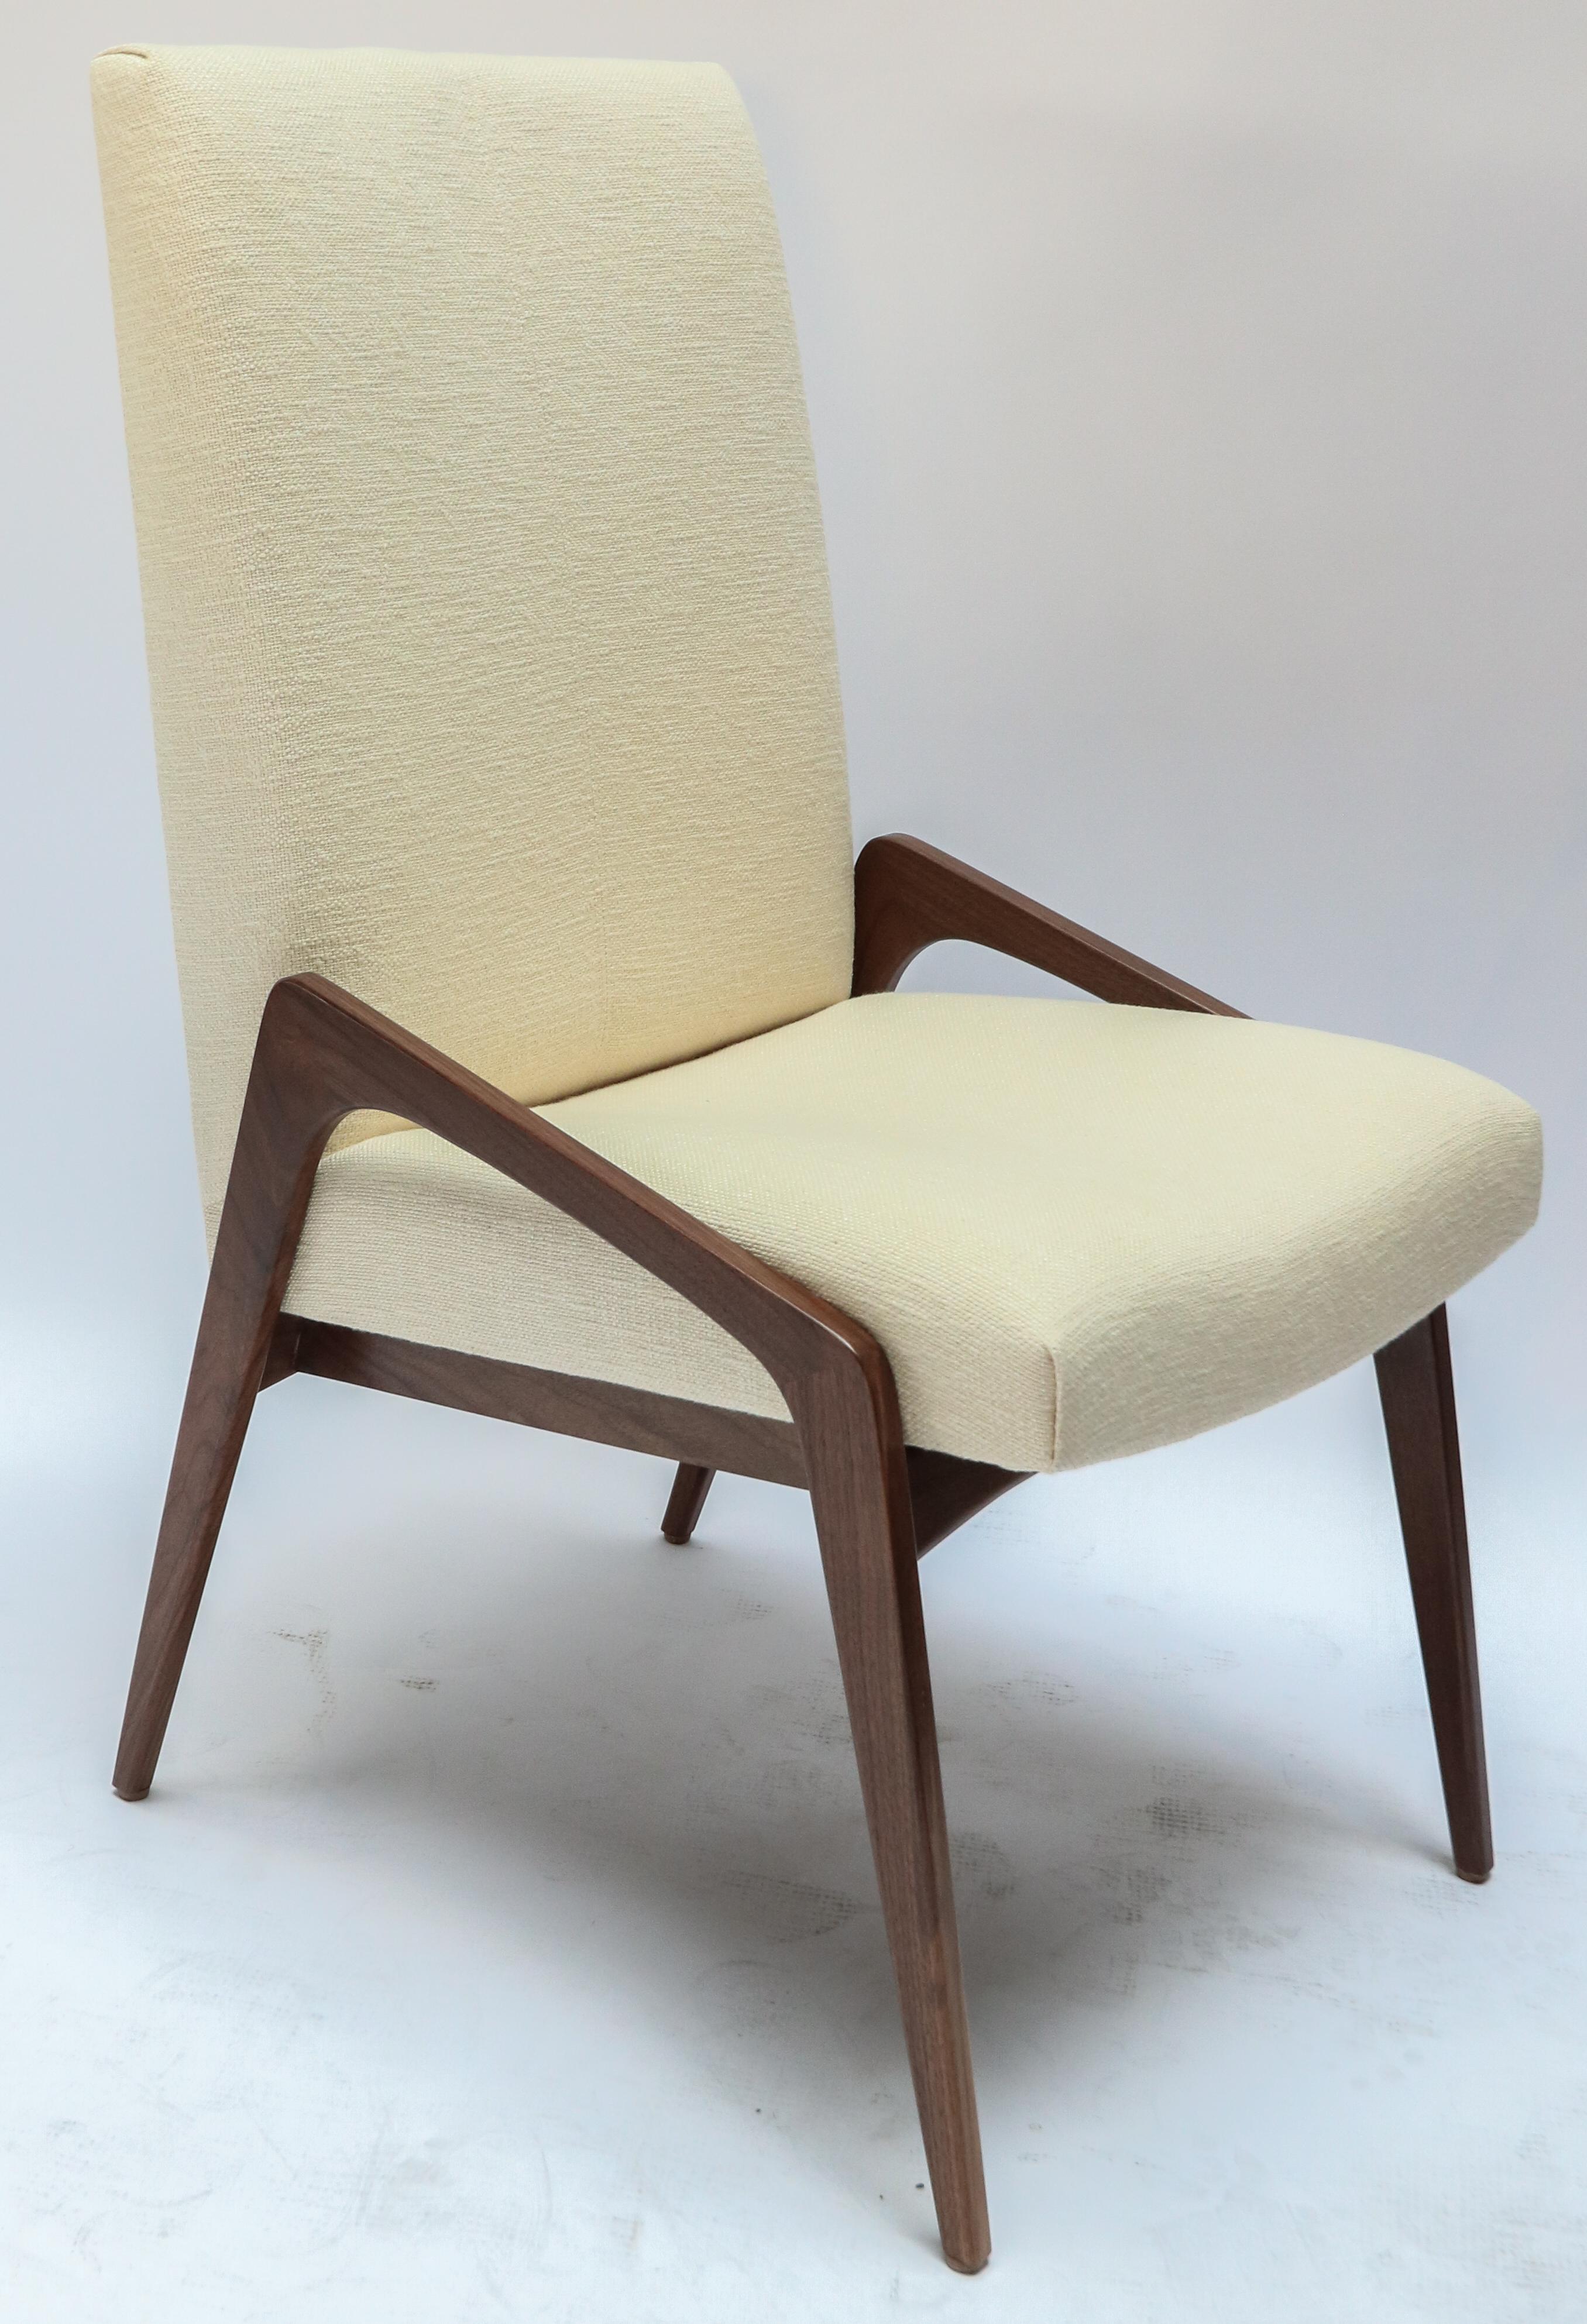 Set of 10 custom midcentury style dining chairs in American walnut and ivory linen. Made in Los Angeles by Adesso Imports. Can be done in different woods and fabrics.